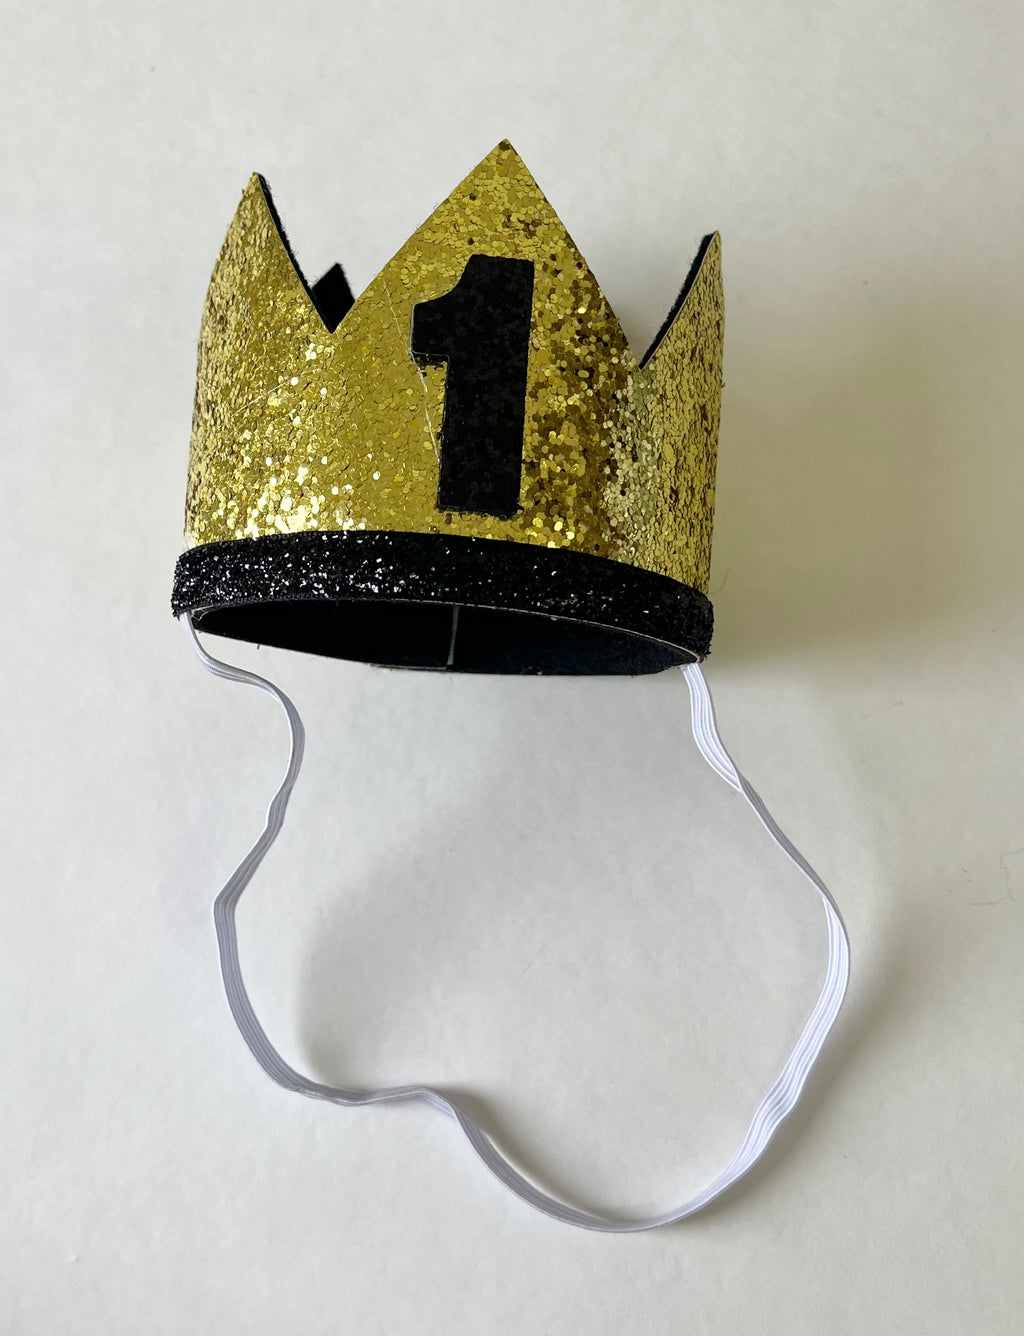 1 Black and Gold Birthday Crown